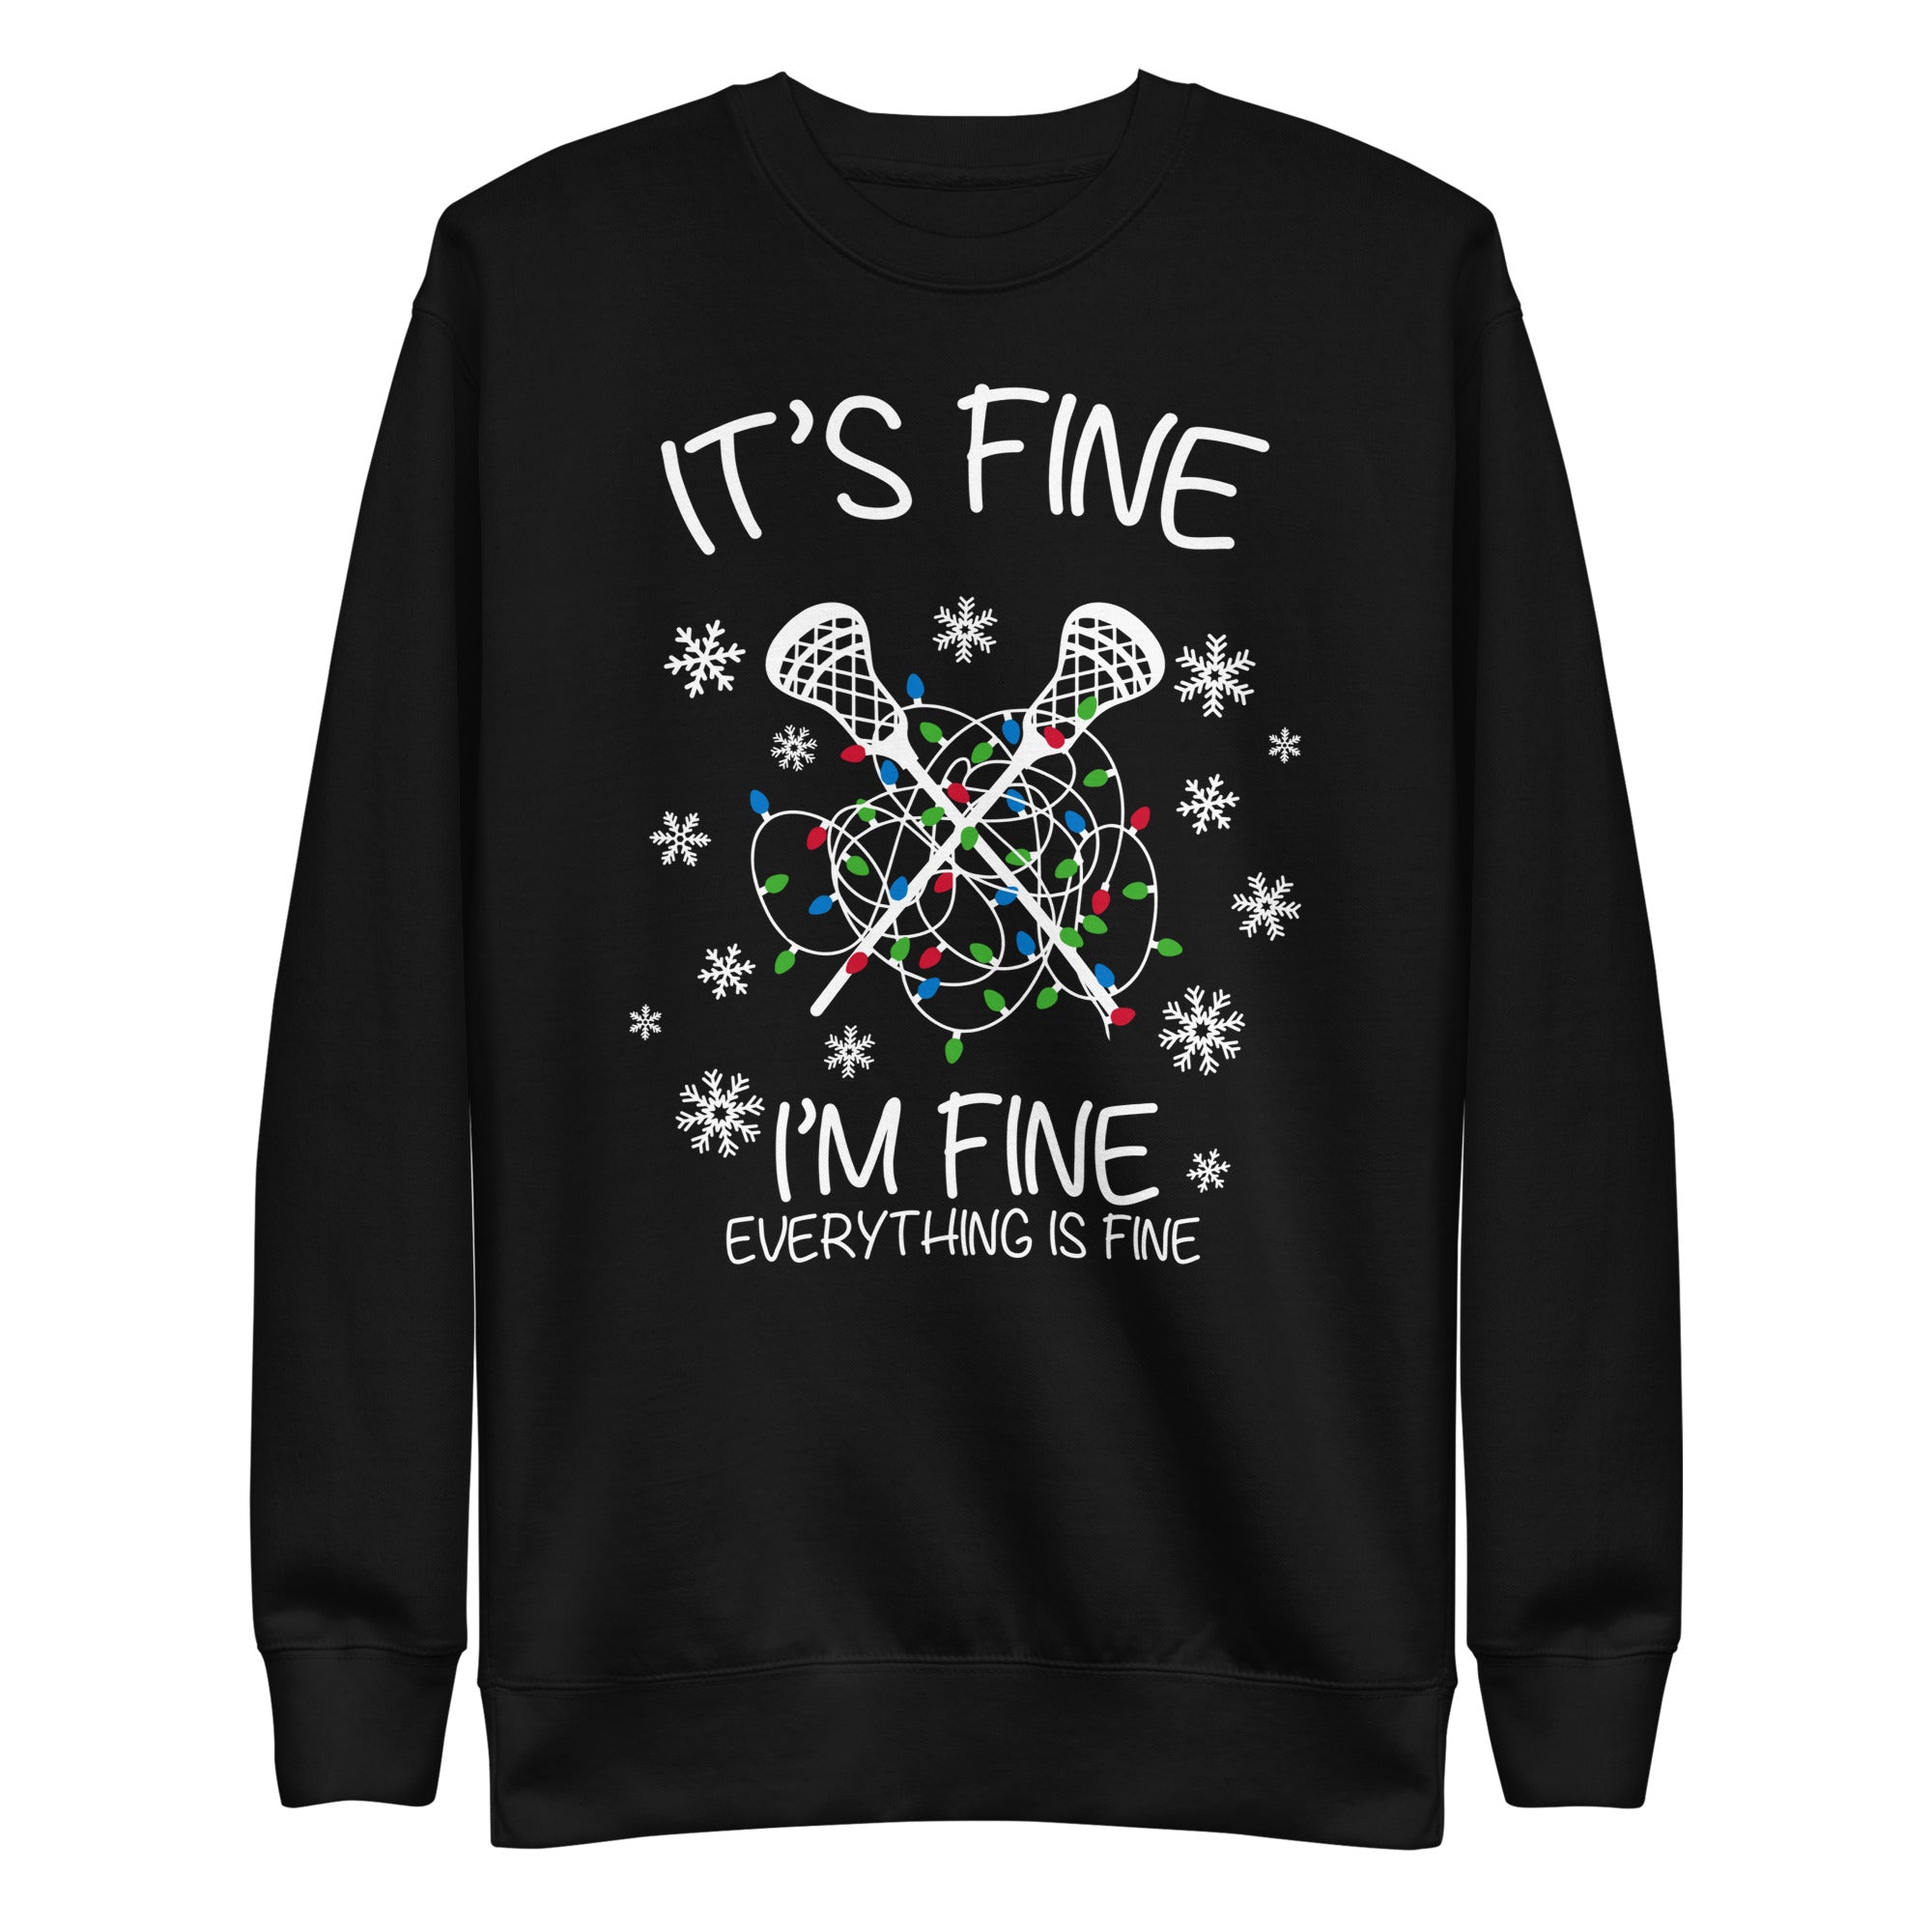 ULC Christmas Sweater - Everything is Fine